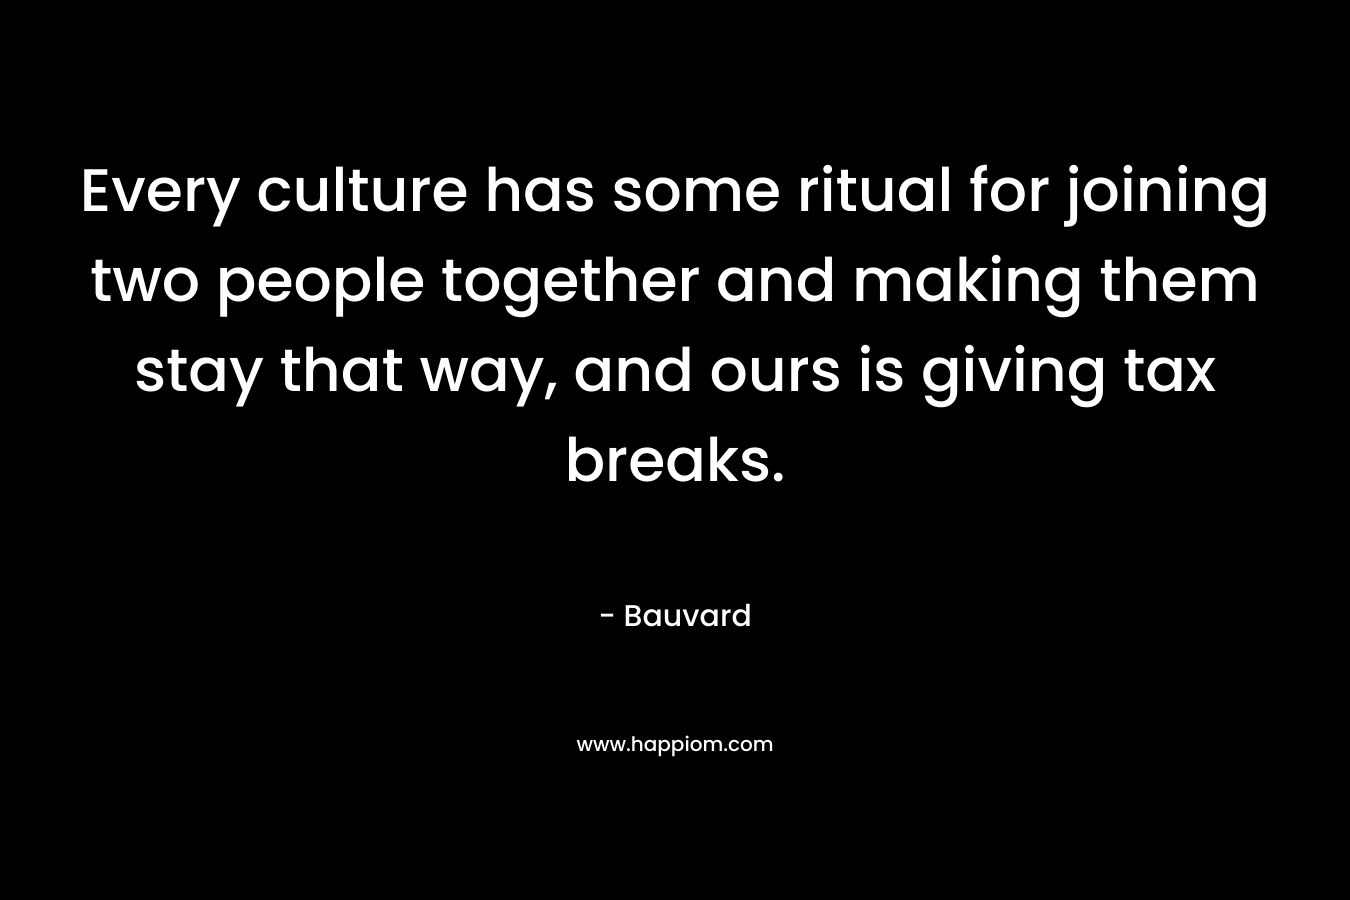 Every culture has some ritual for joining two people together and making them stay that way, and ours is giving tax breaks. – Bauvard